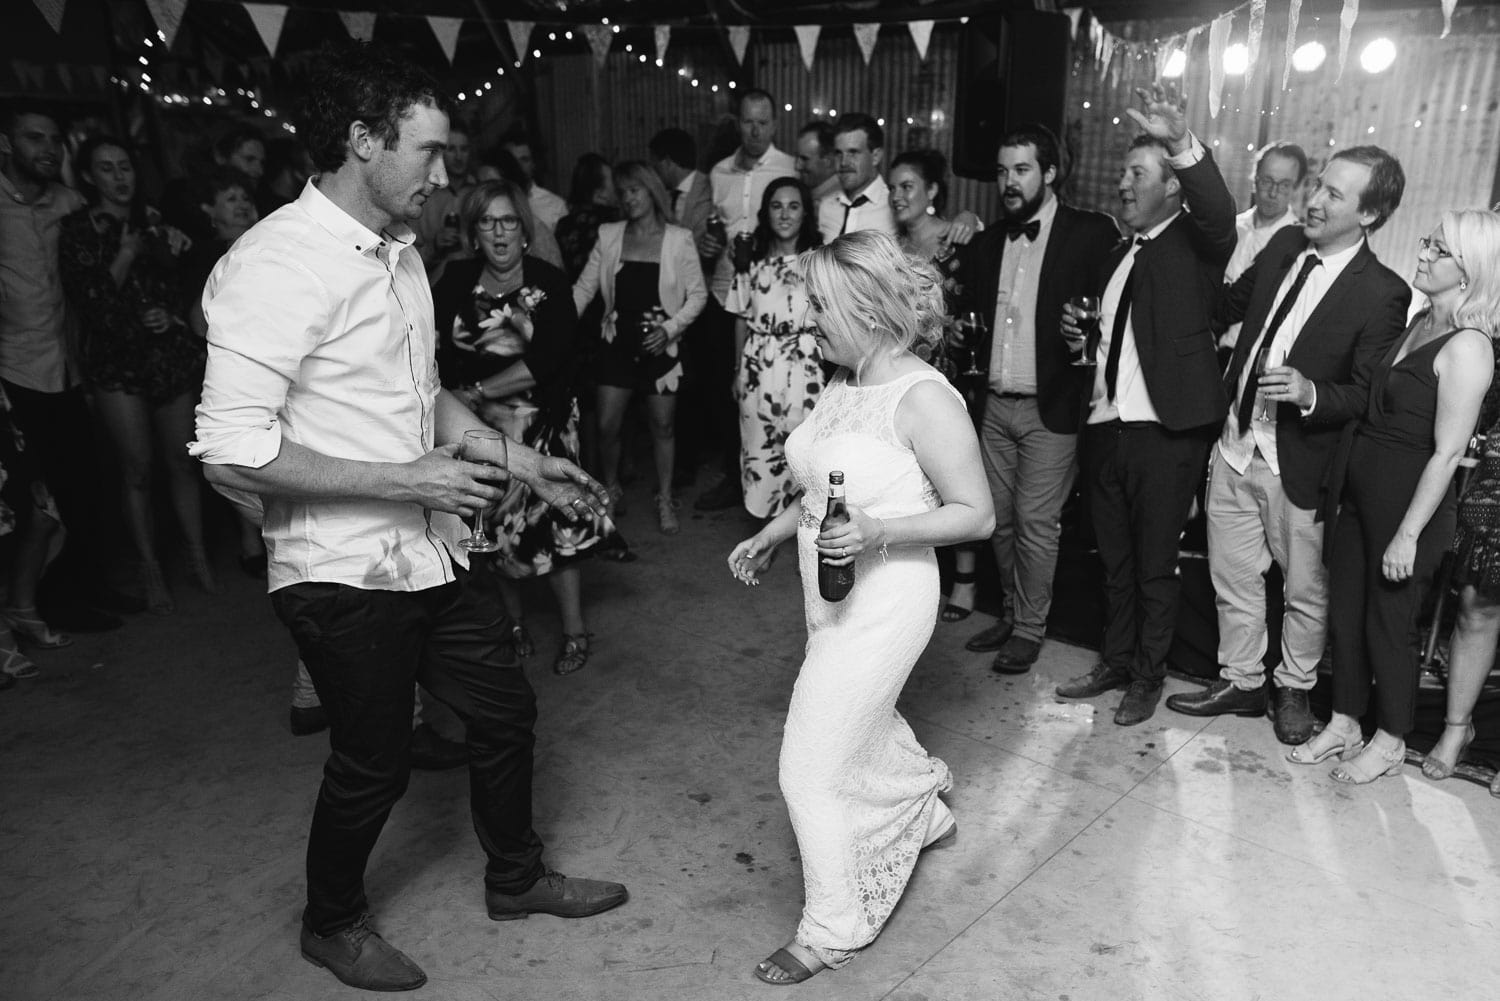 Bride and groom dancing at a wedding